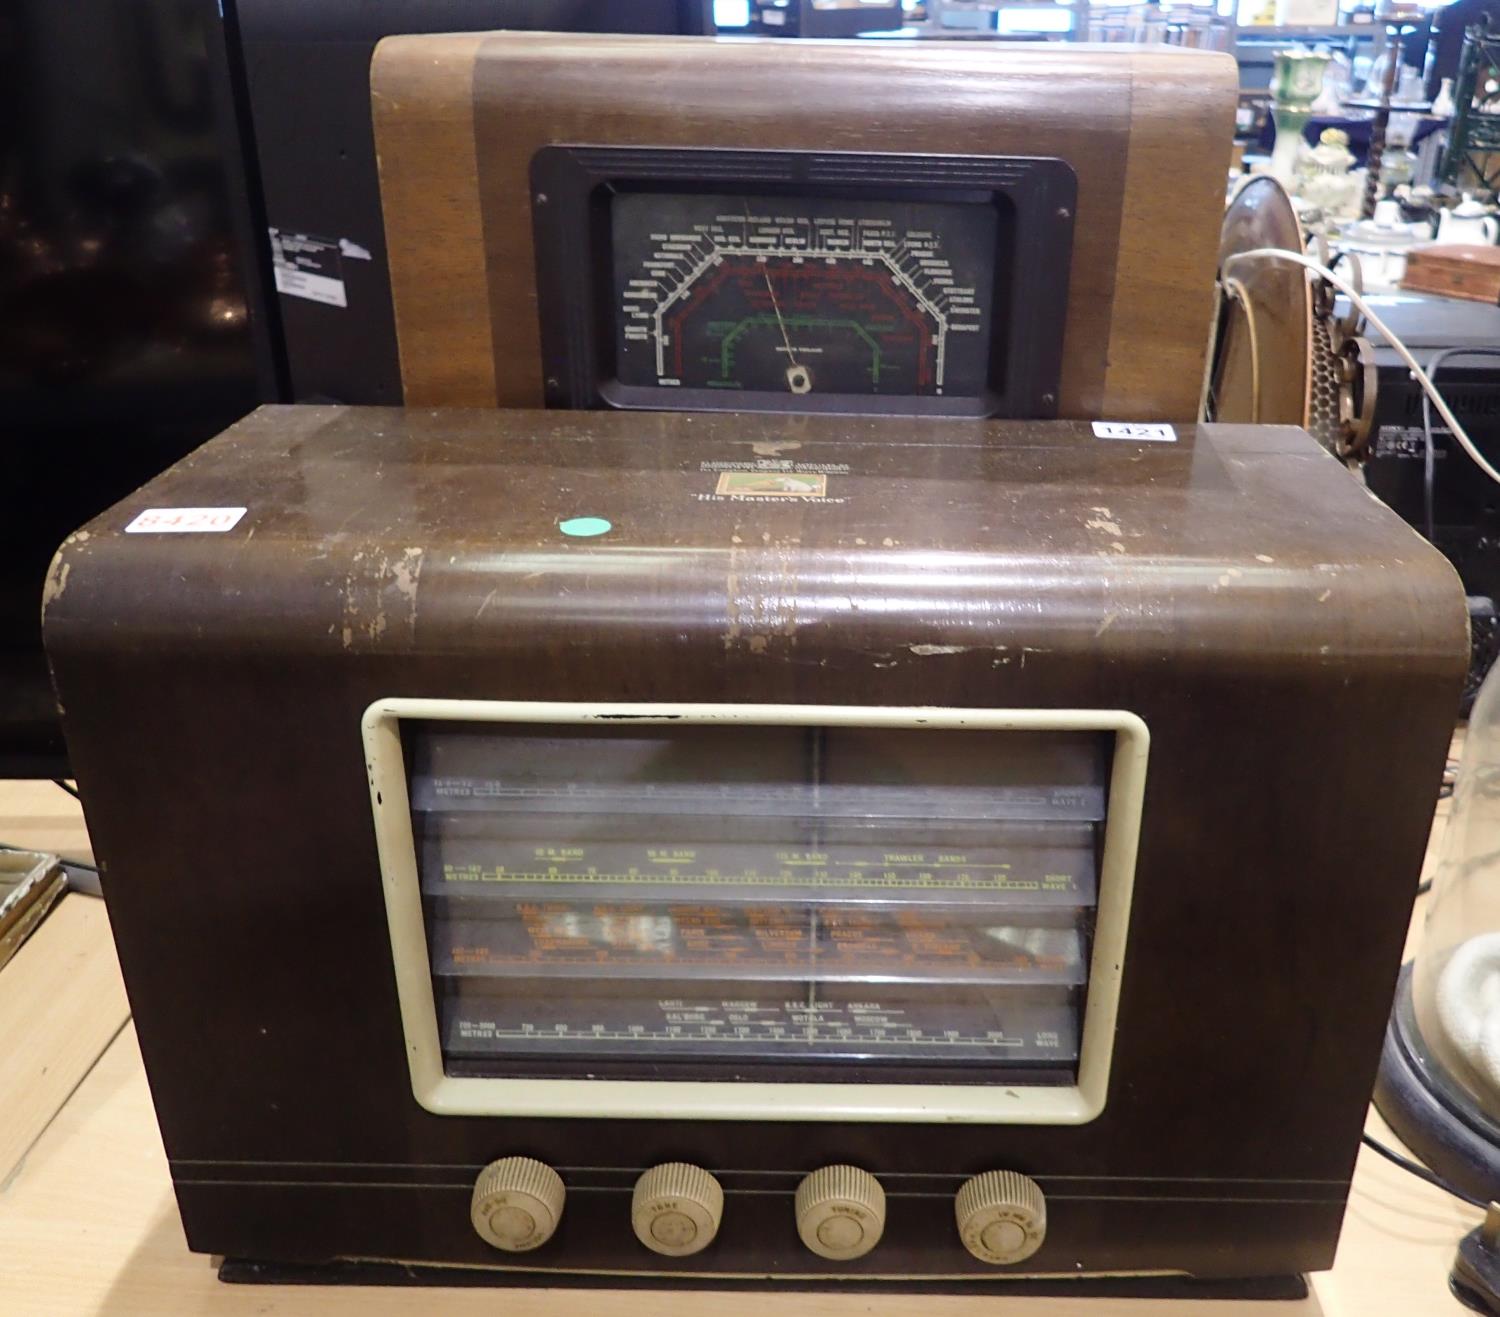 Vintage His Masters Voice valve radio, requires attention and a Cossor valve radio. Not available